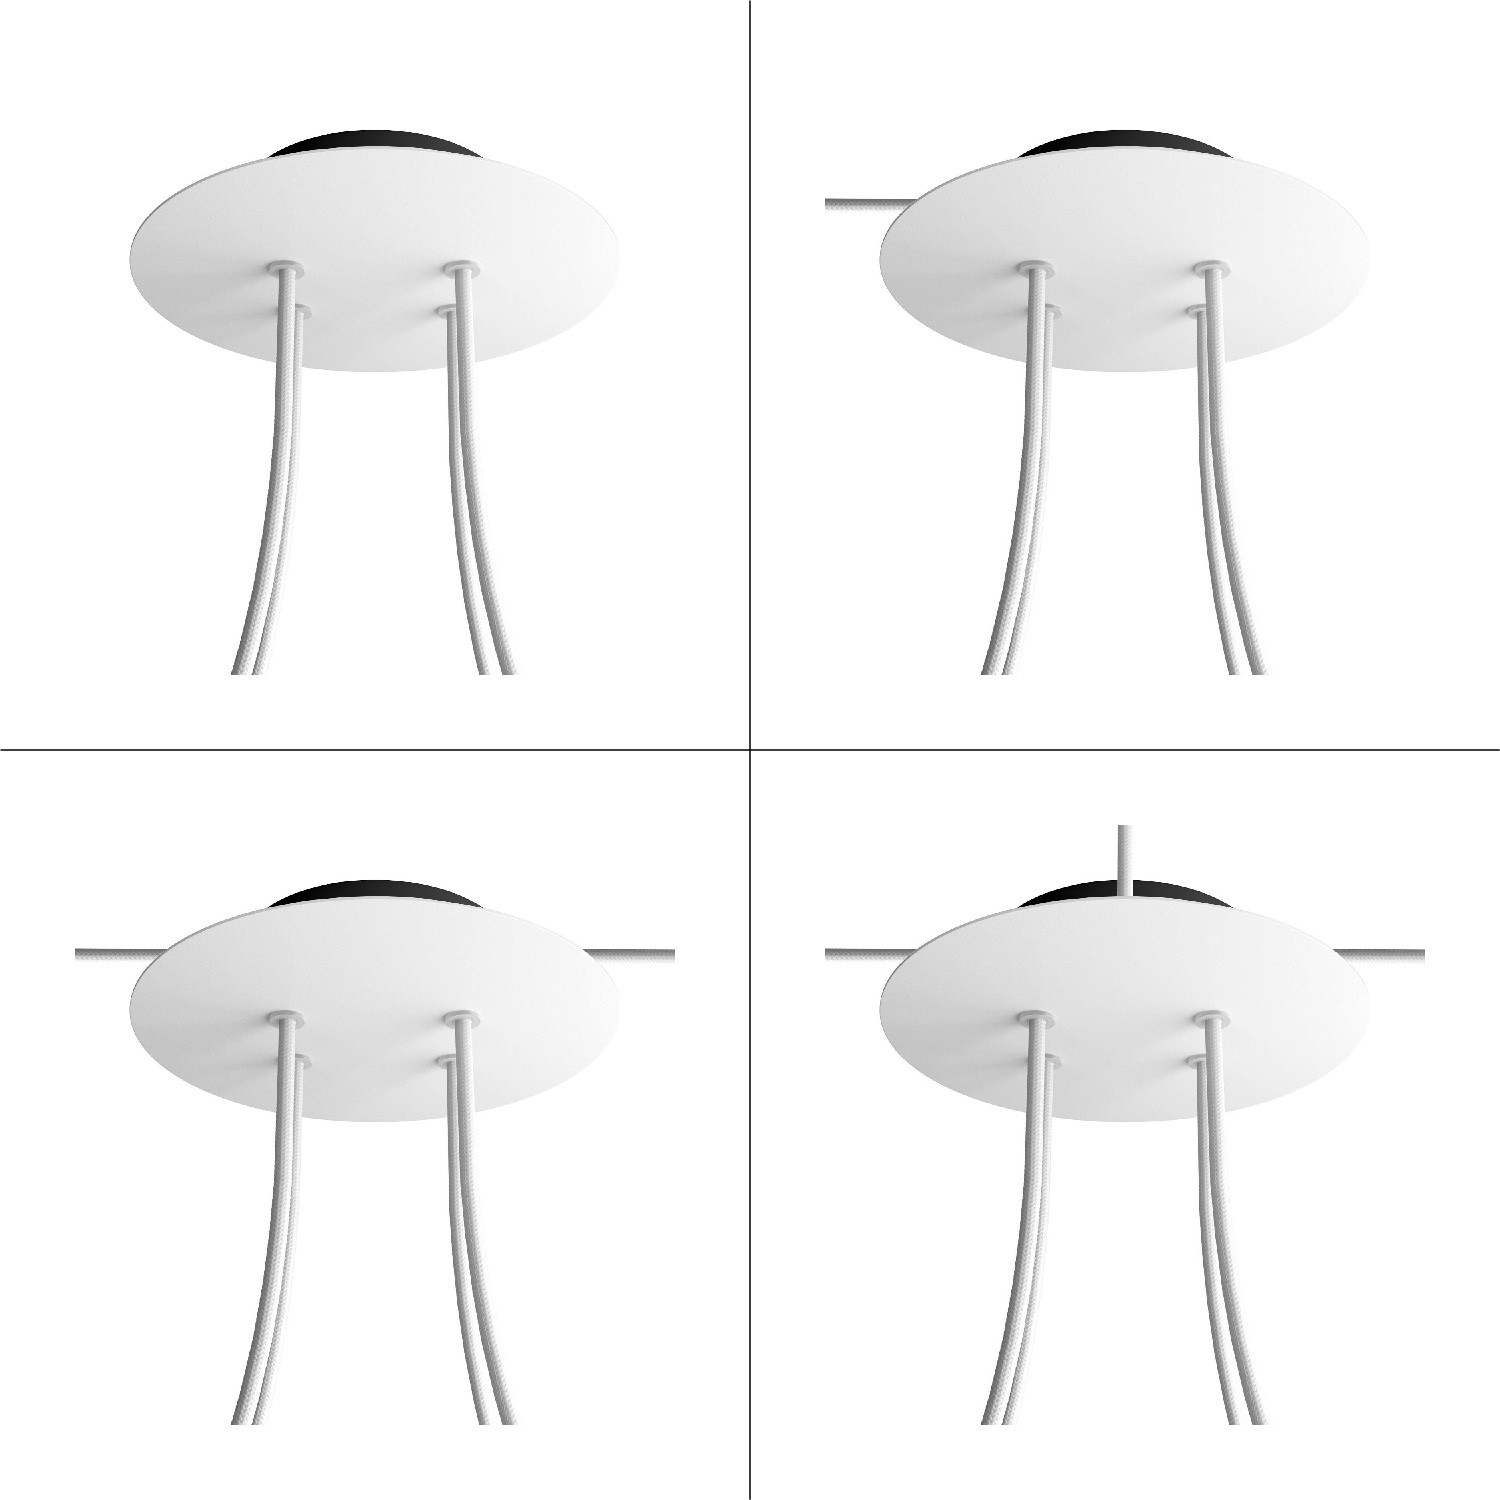 4 Holes - LARGE Round Ceiling Canopy Kit - Rose One System